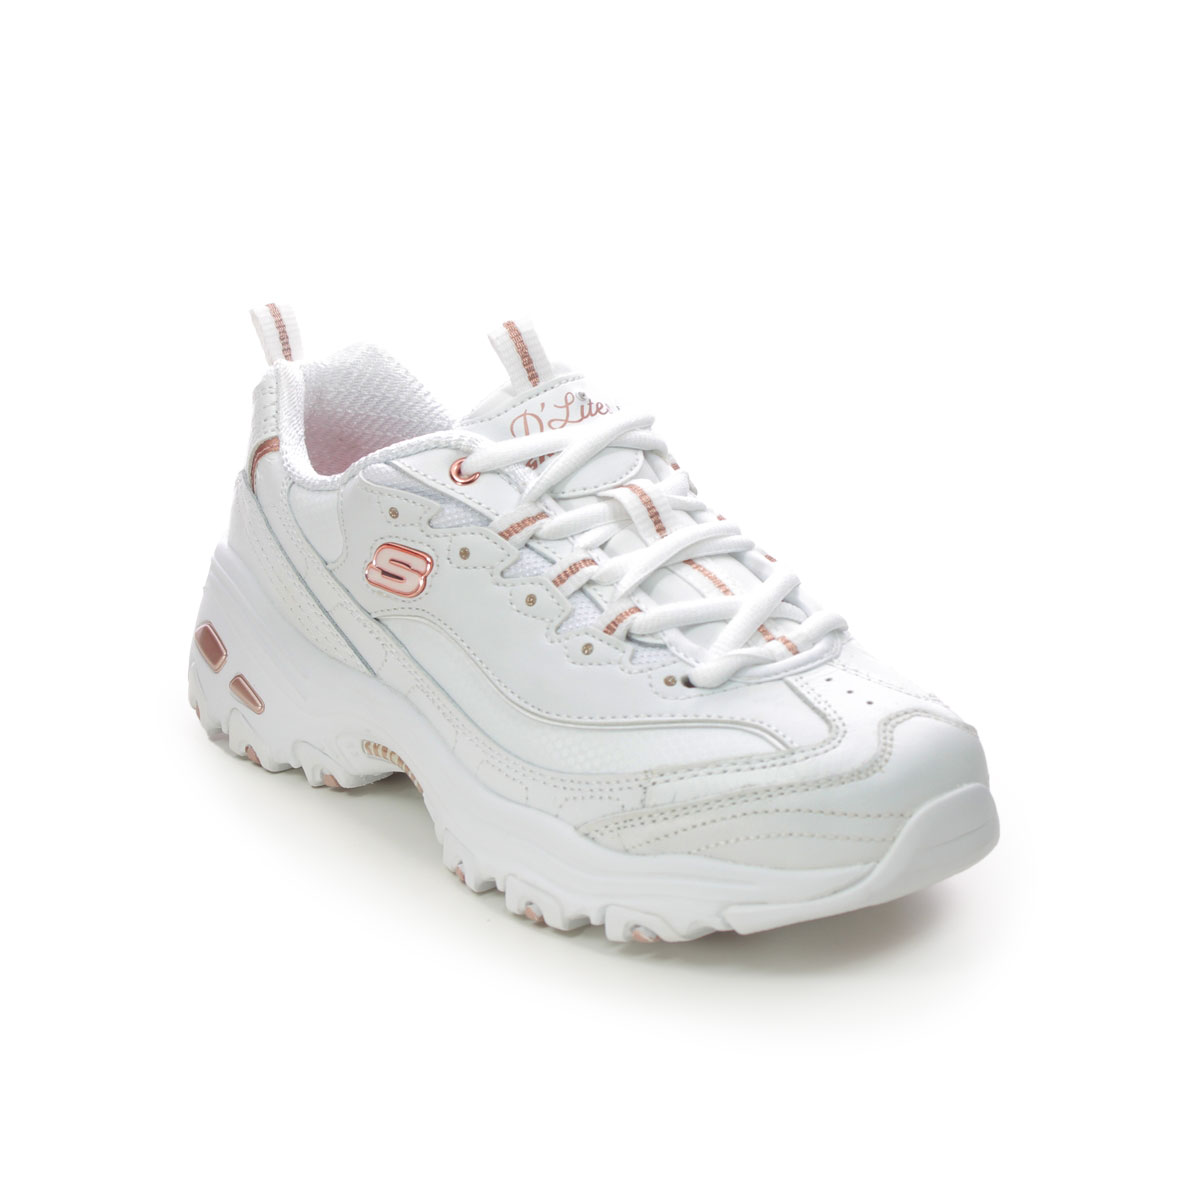 Skechers Dlites Fresh WTRG White Rose gold Womens trainers 11931 in a Plain Leather and Textile in Size 5.5